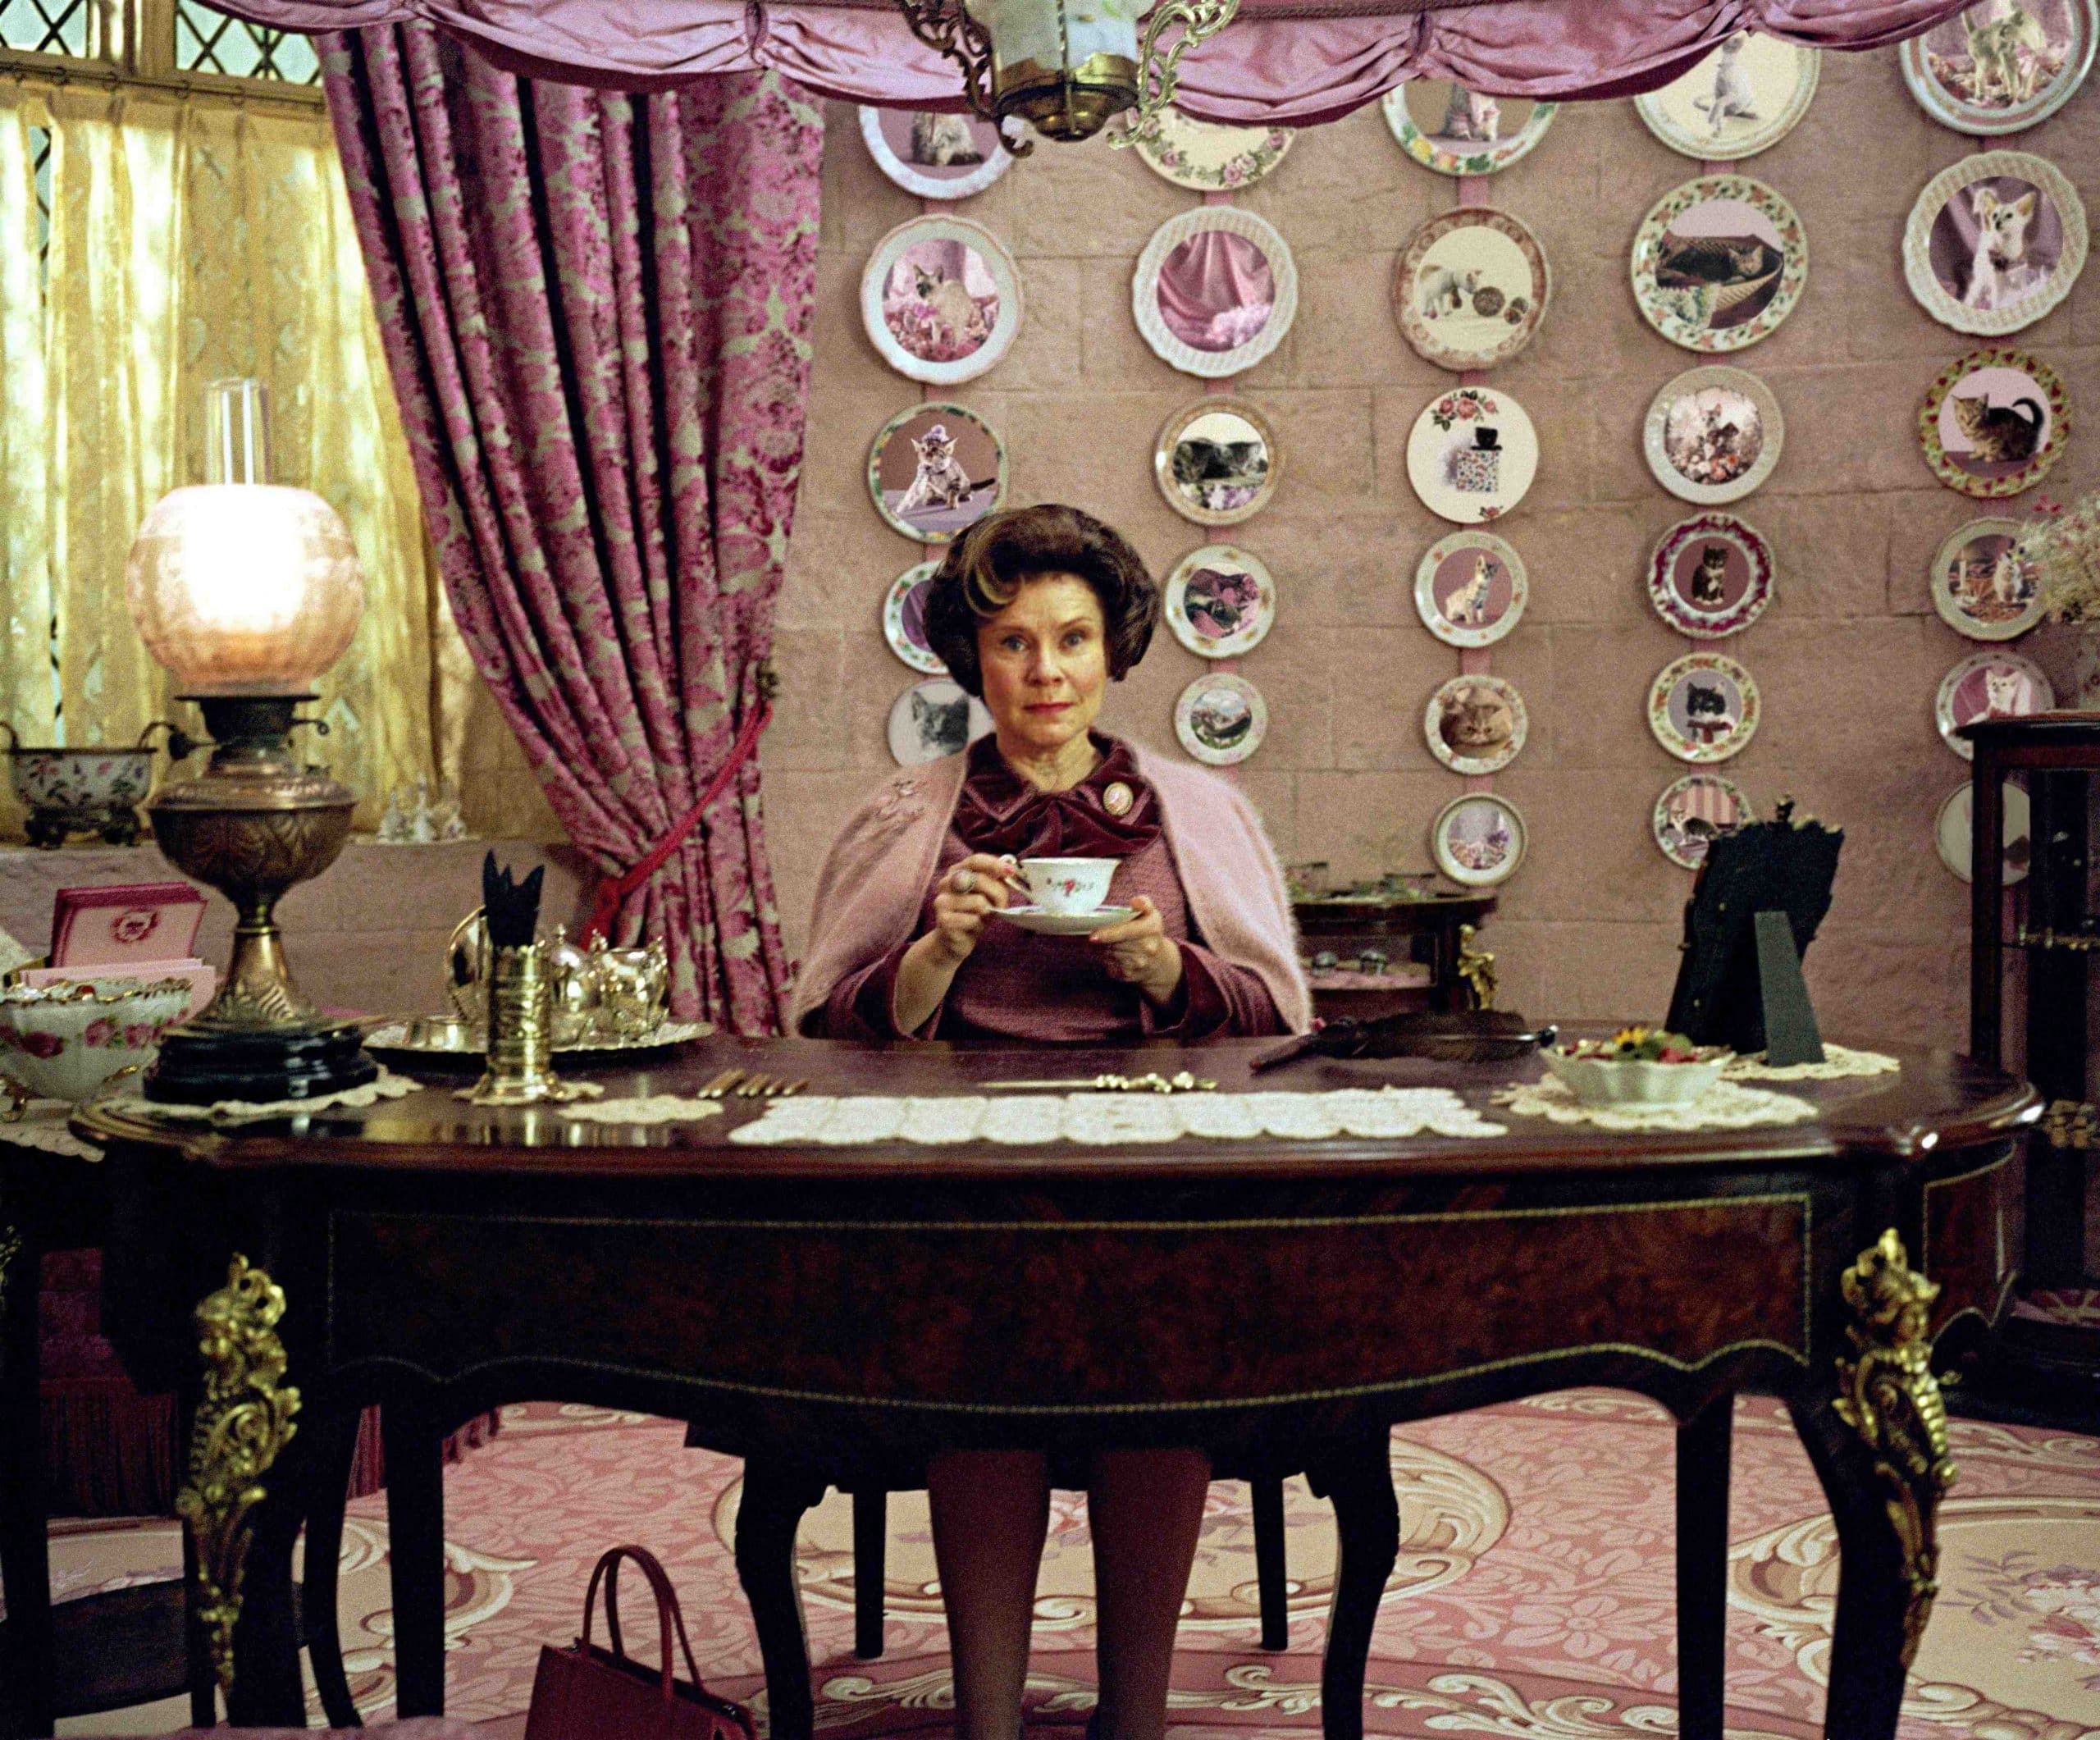 IMELDA STAUNTON as Dolores Umbridge in Warner Bros. Pictures' fantasy "Harry Potter and the Order of the Phoenix." PHOTOGRAPHS TO BE USED SOLELY FOR ADVERTISING, PROMOTION, PUBLICITY OR REVIEWS OF THIS SPECIFIC MOTION PICTURE AND TO REMAIN THE PROPERTY OF THE STUDIO. NOT FOR SALE OR REDISTRIBUTION.